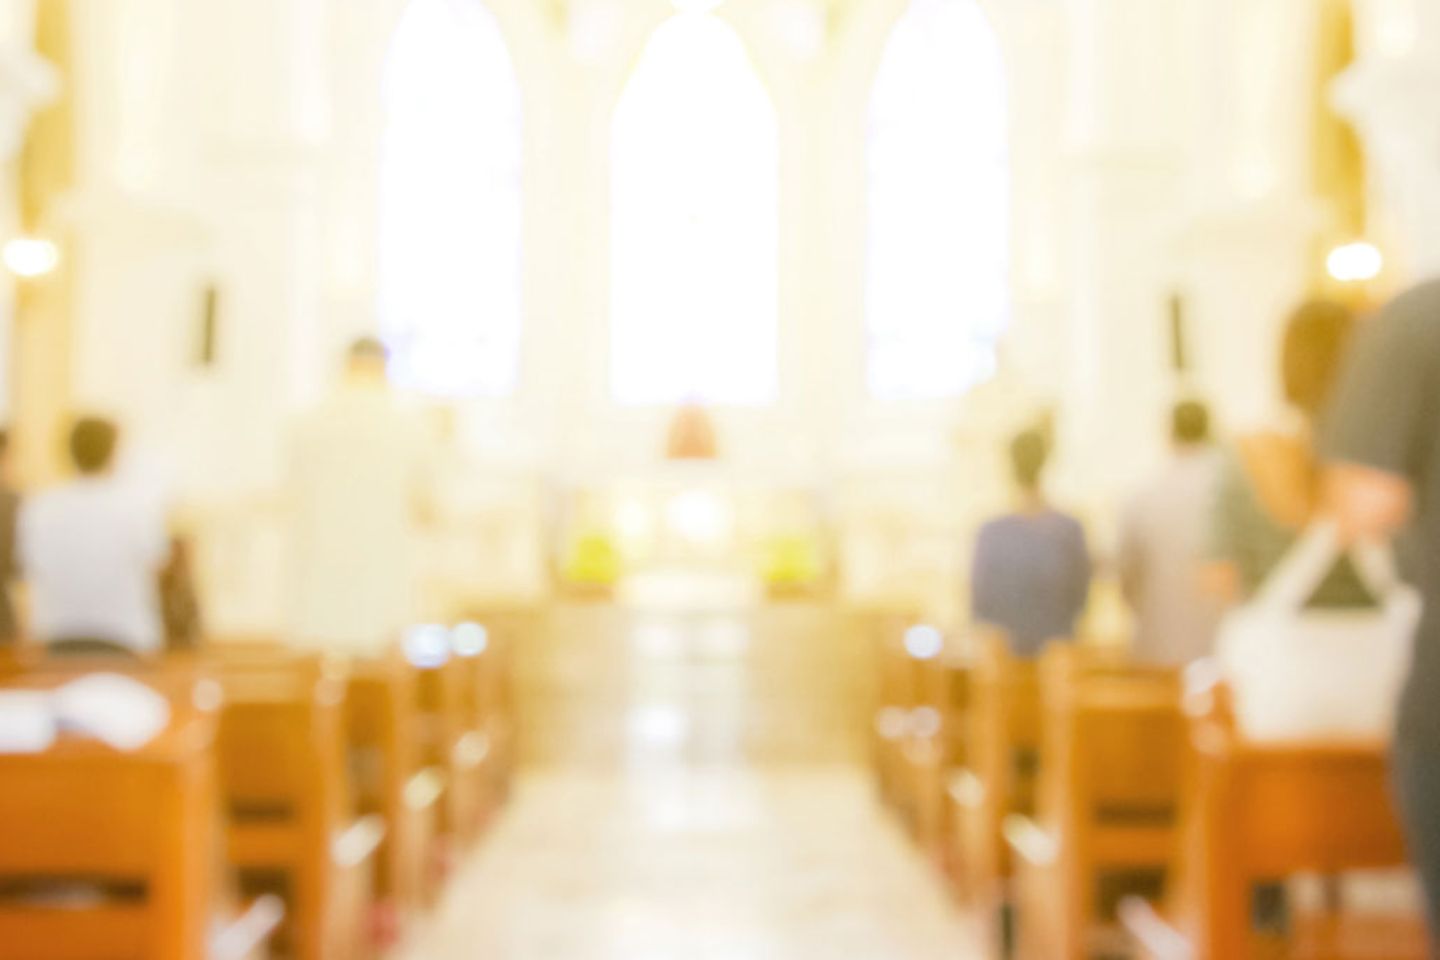 Blurred image of a Christian service